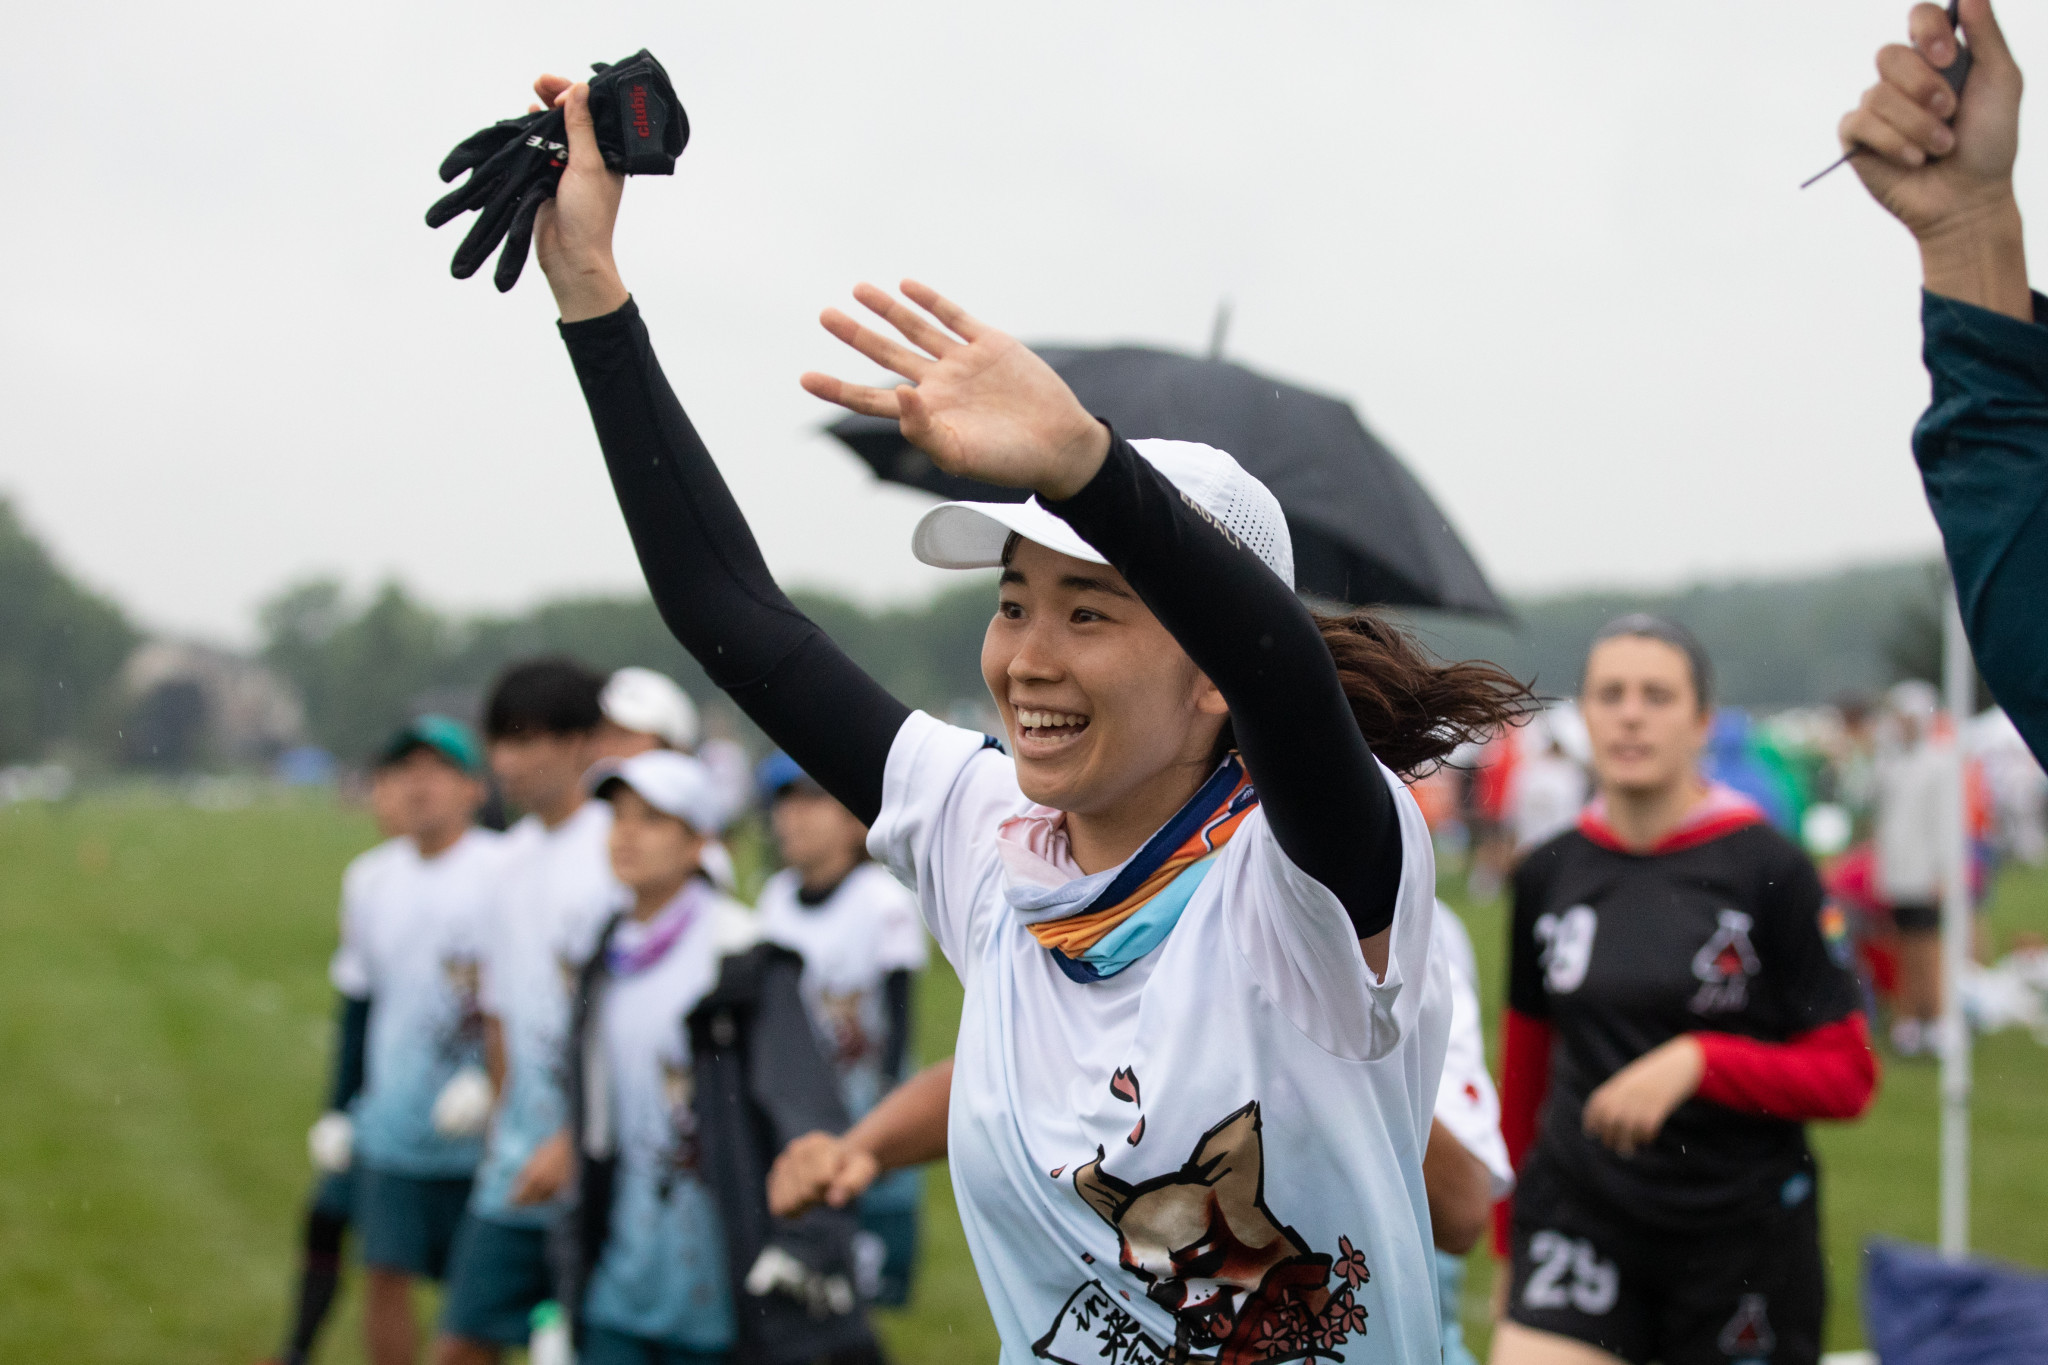 CRAZY enjoyed themselves on day five, but they exited the main bracket following a loss to LAB ©Marshall Lian for UltiPhotos